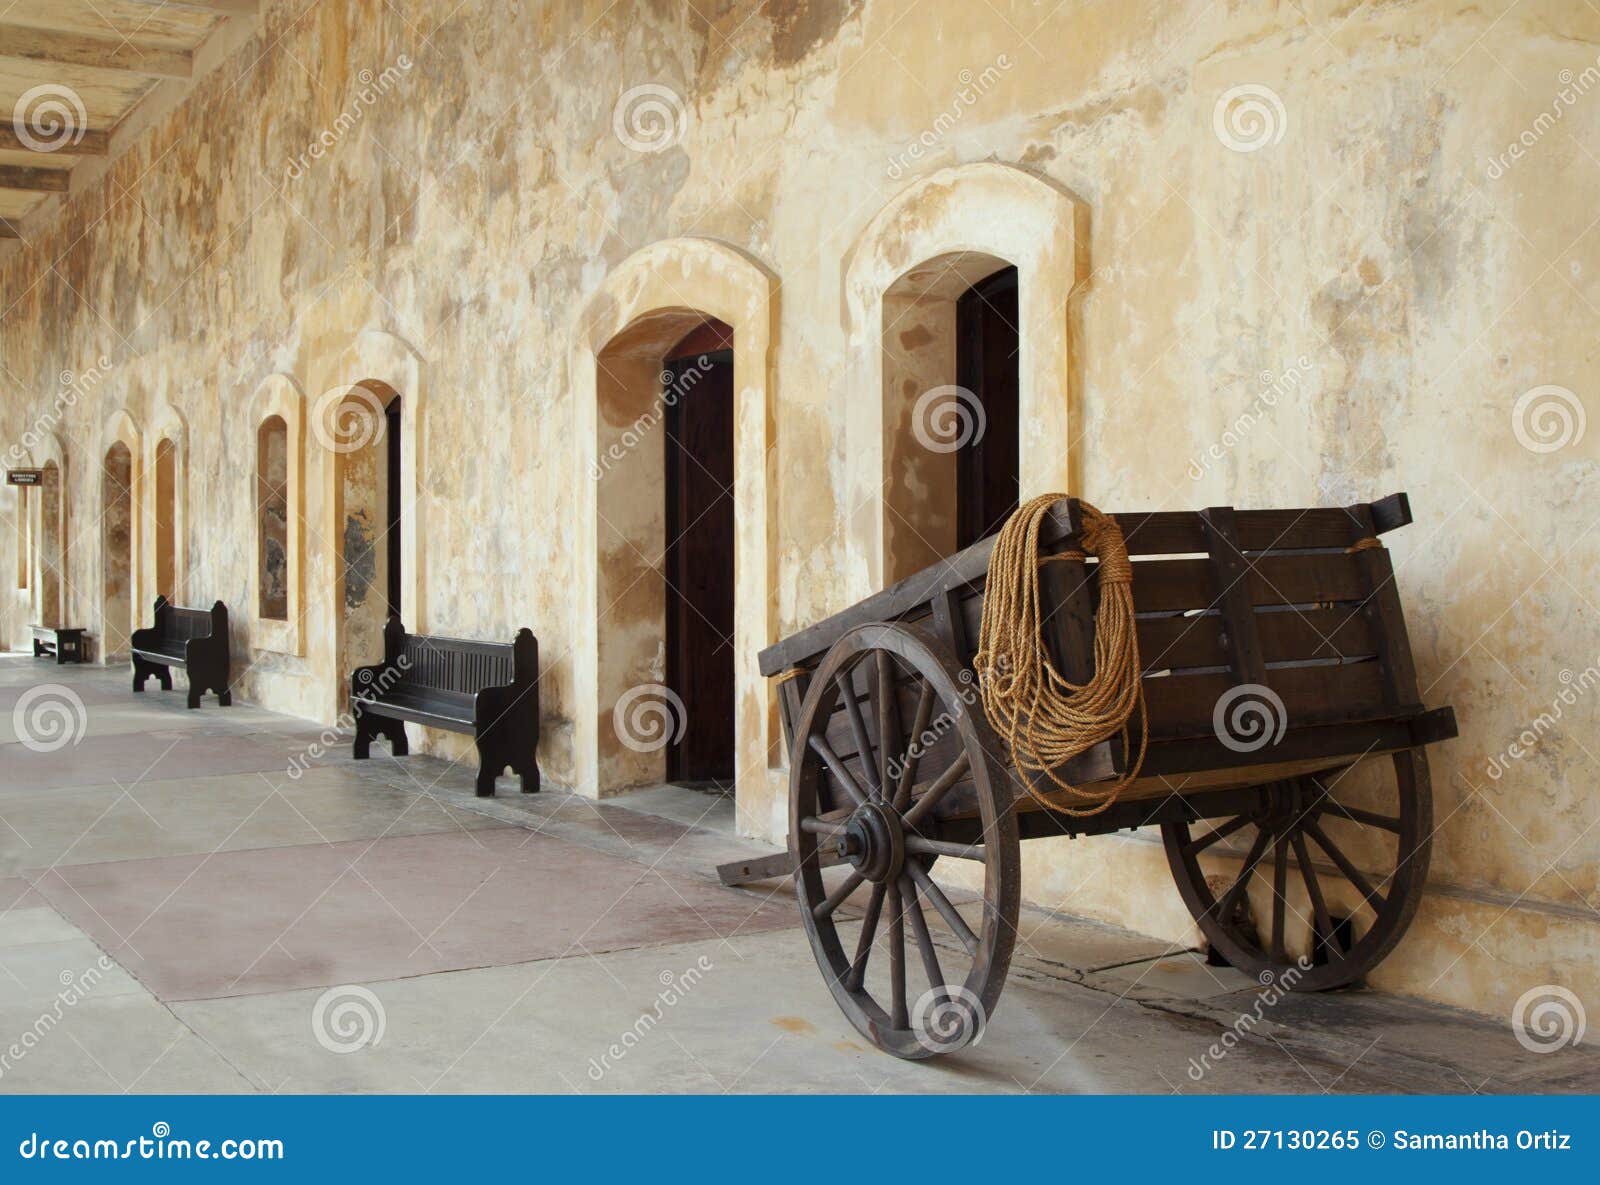 Fort Cart. Spanish Antique Cart in Fort